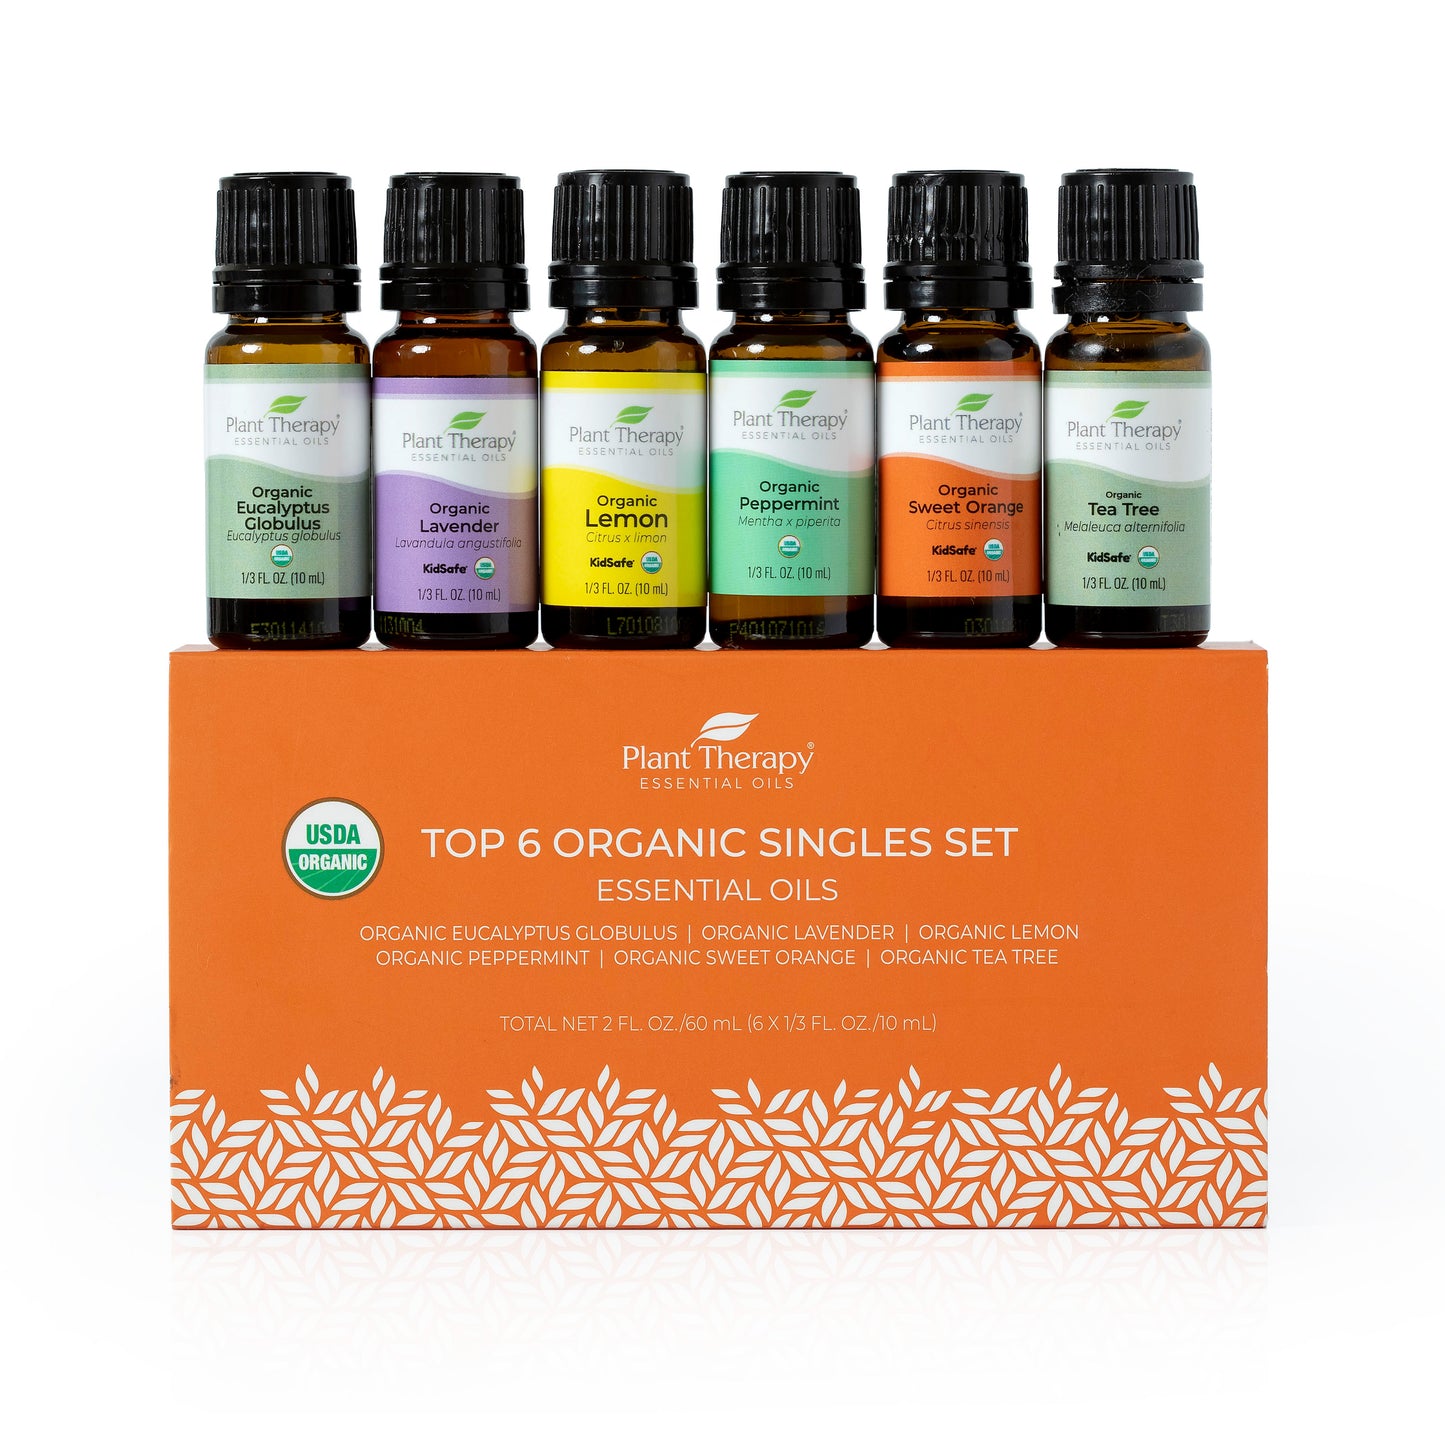 Certified Organic Lavender Oil and Diffuser Set